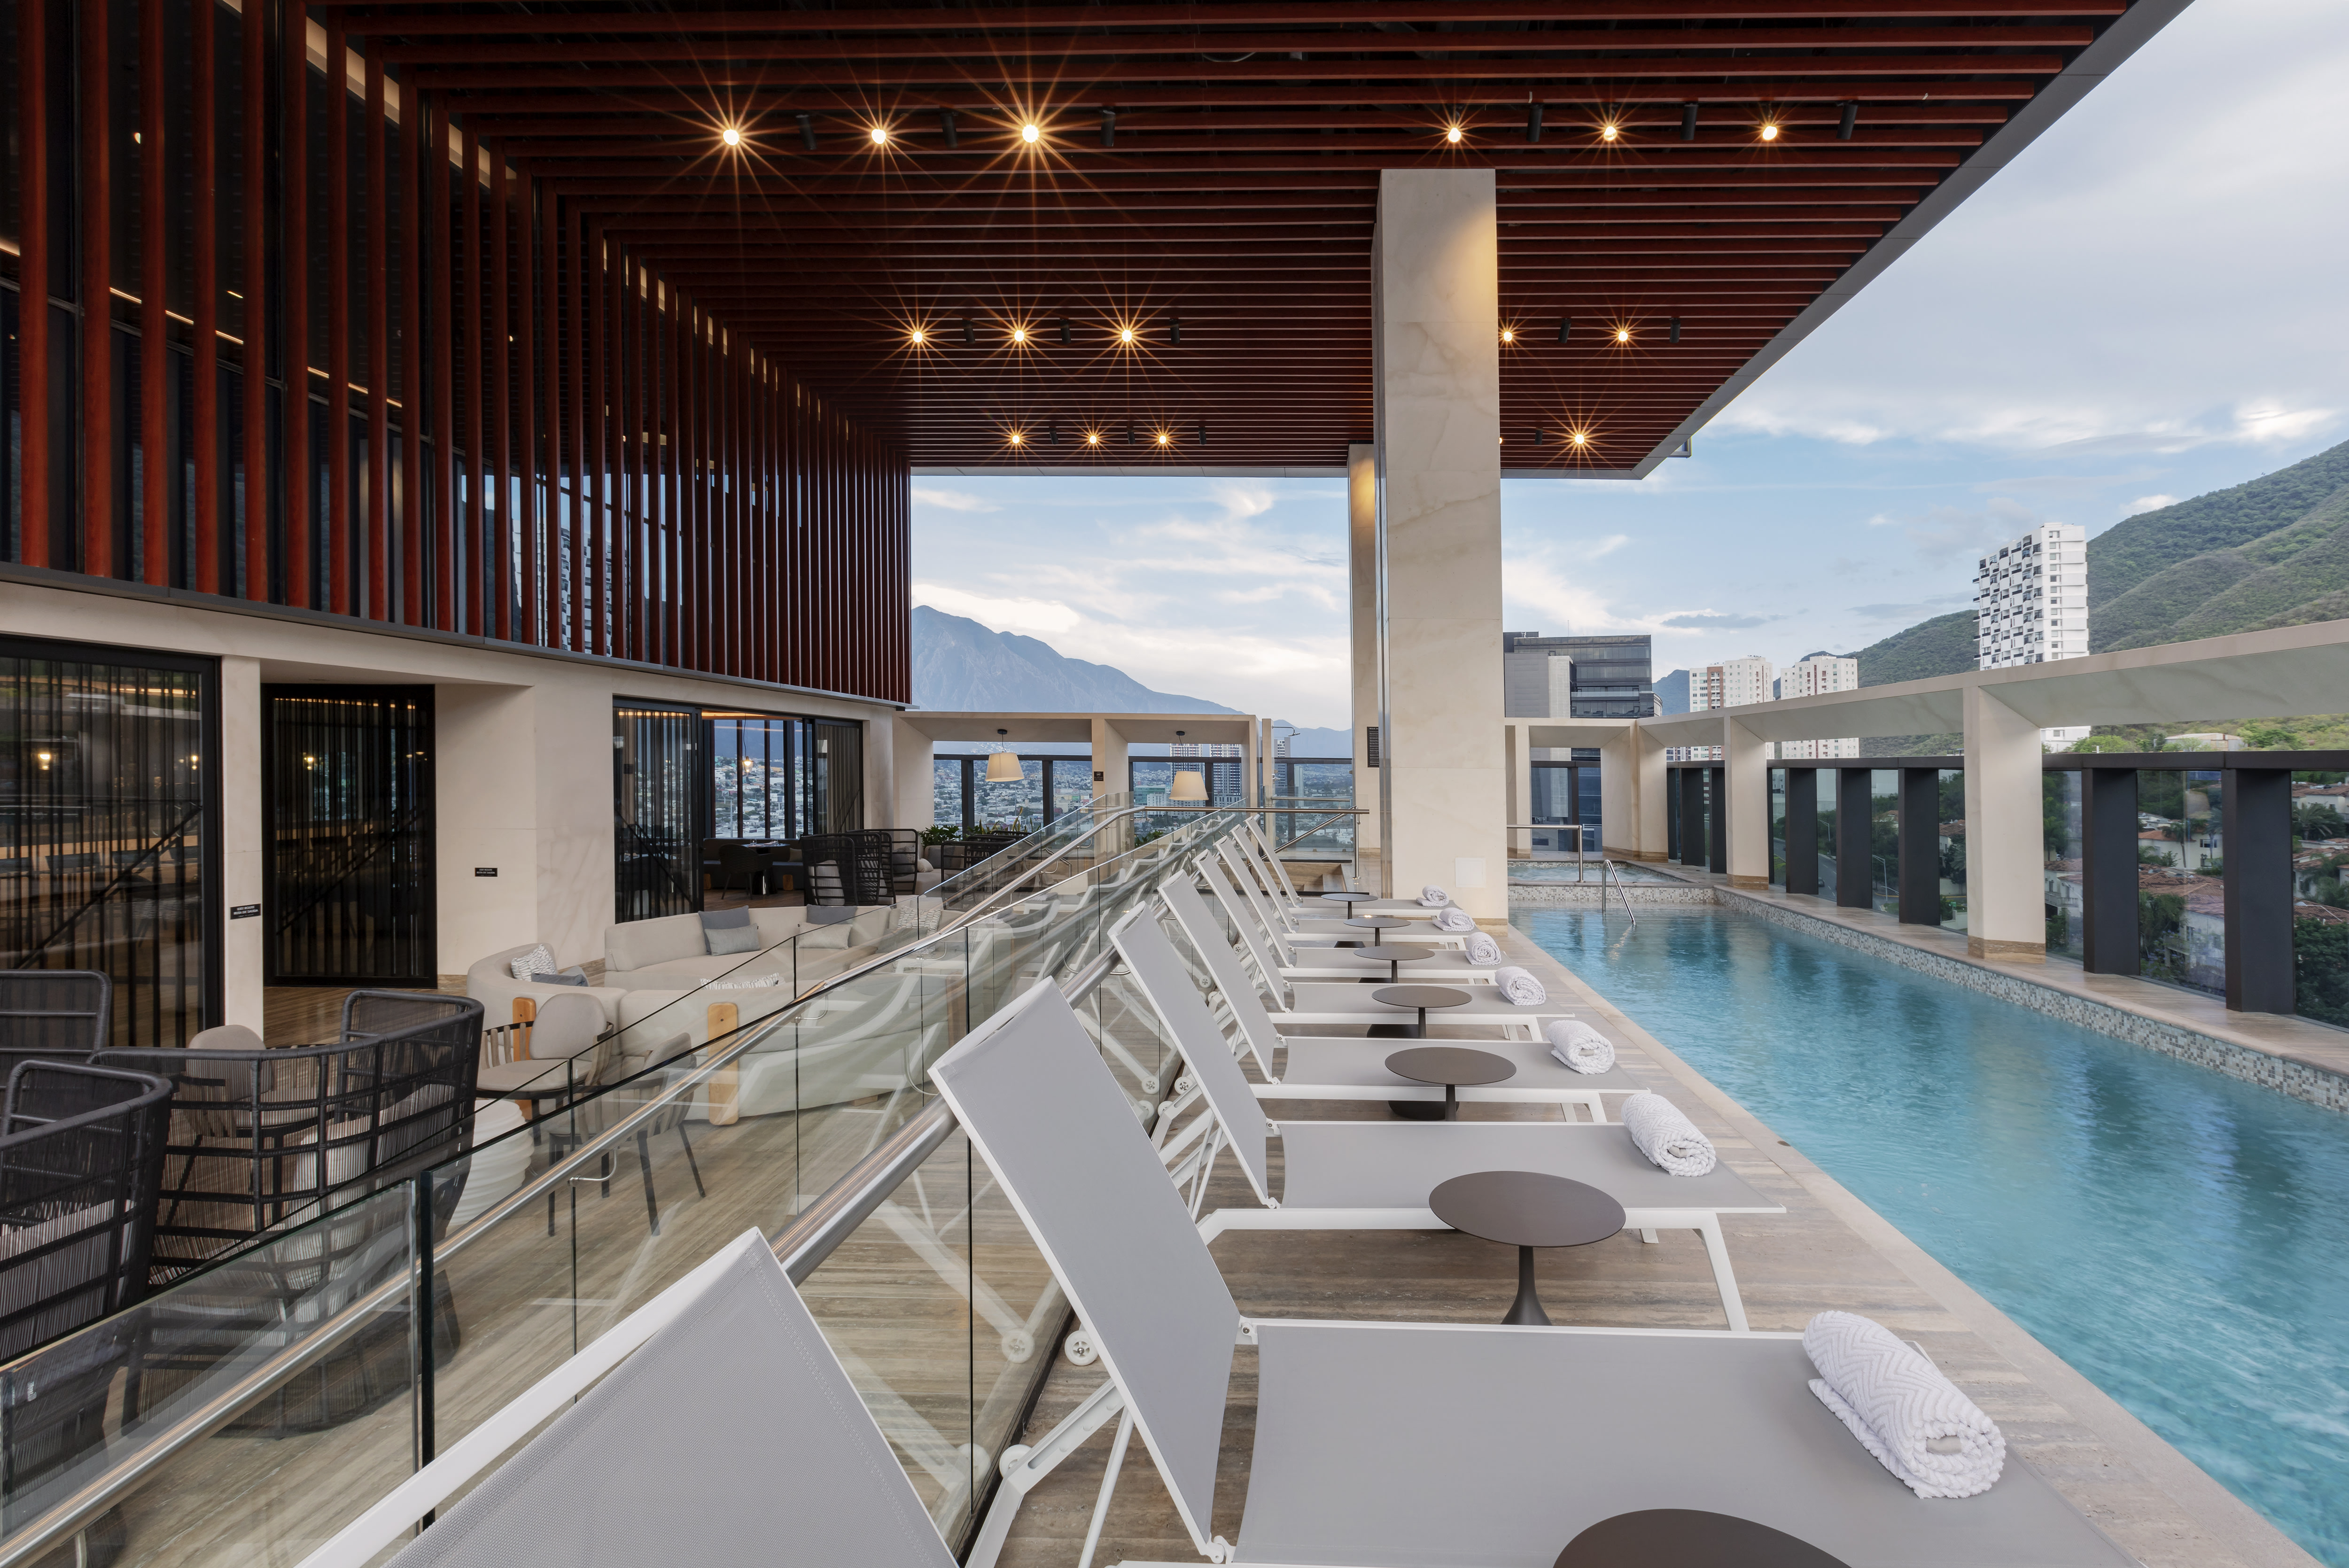 Rooftop pool area with lounge chairs and outdoor bar